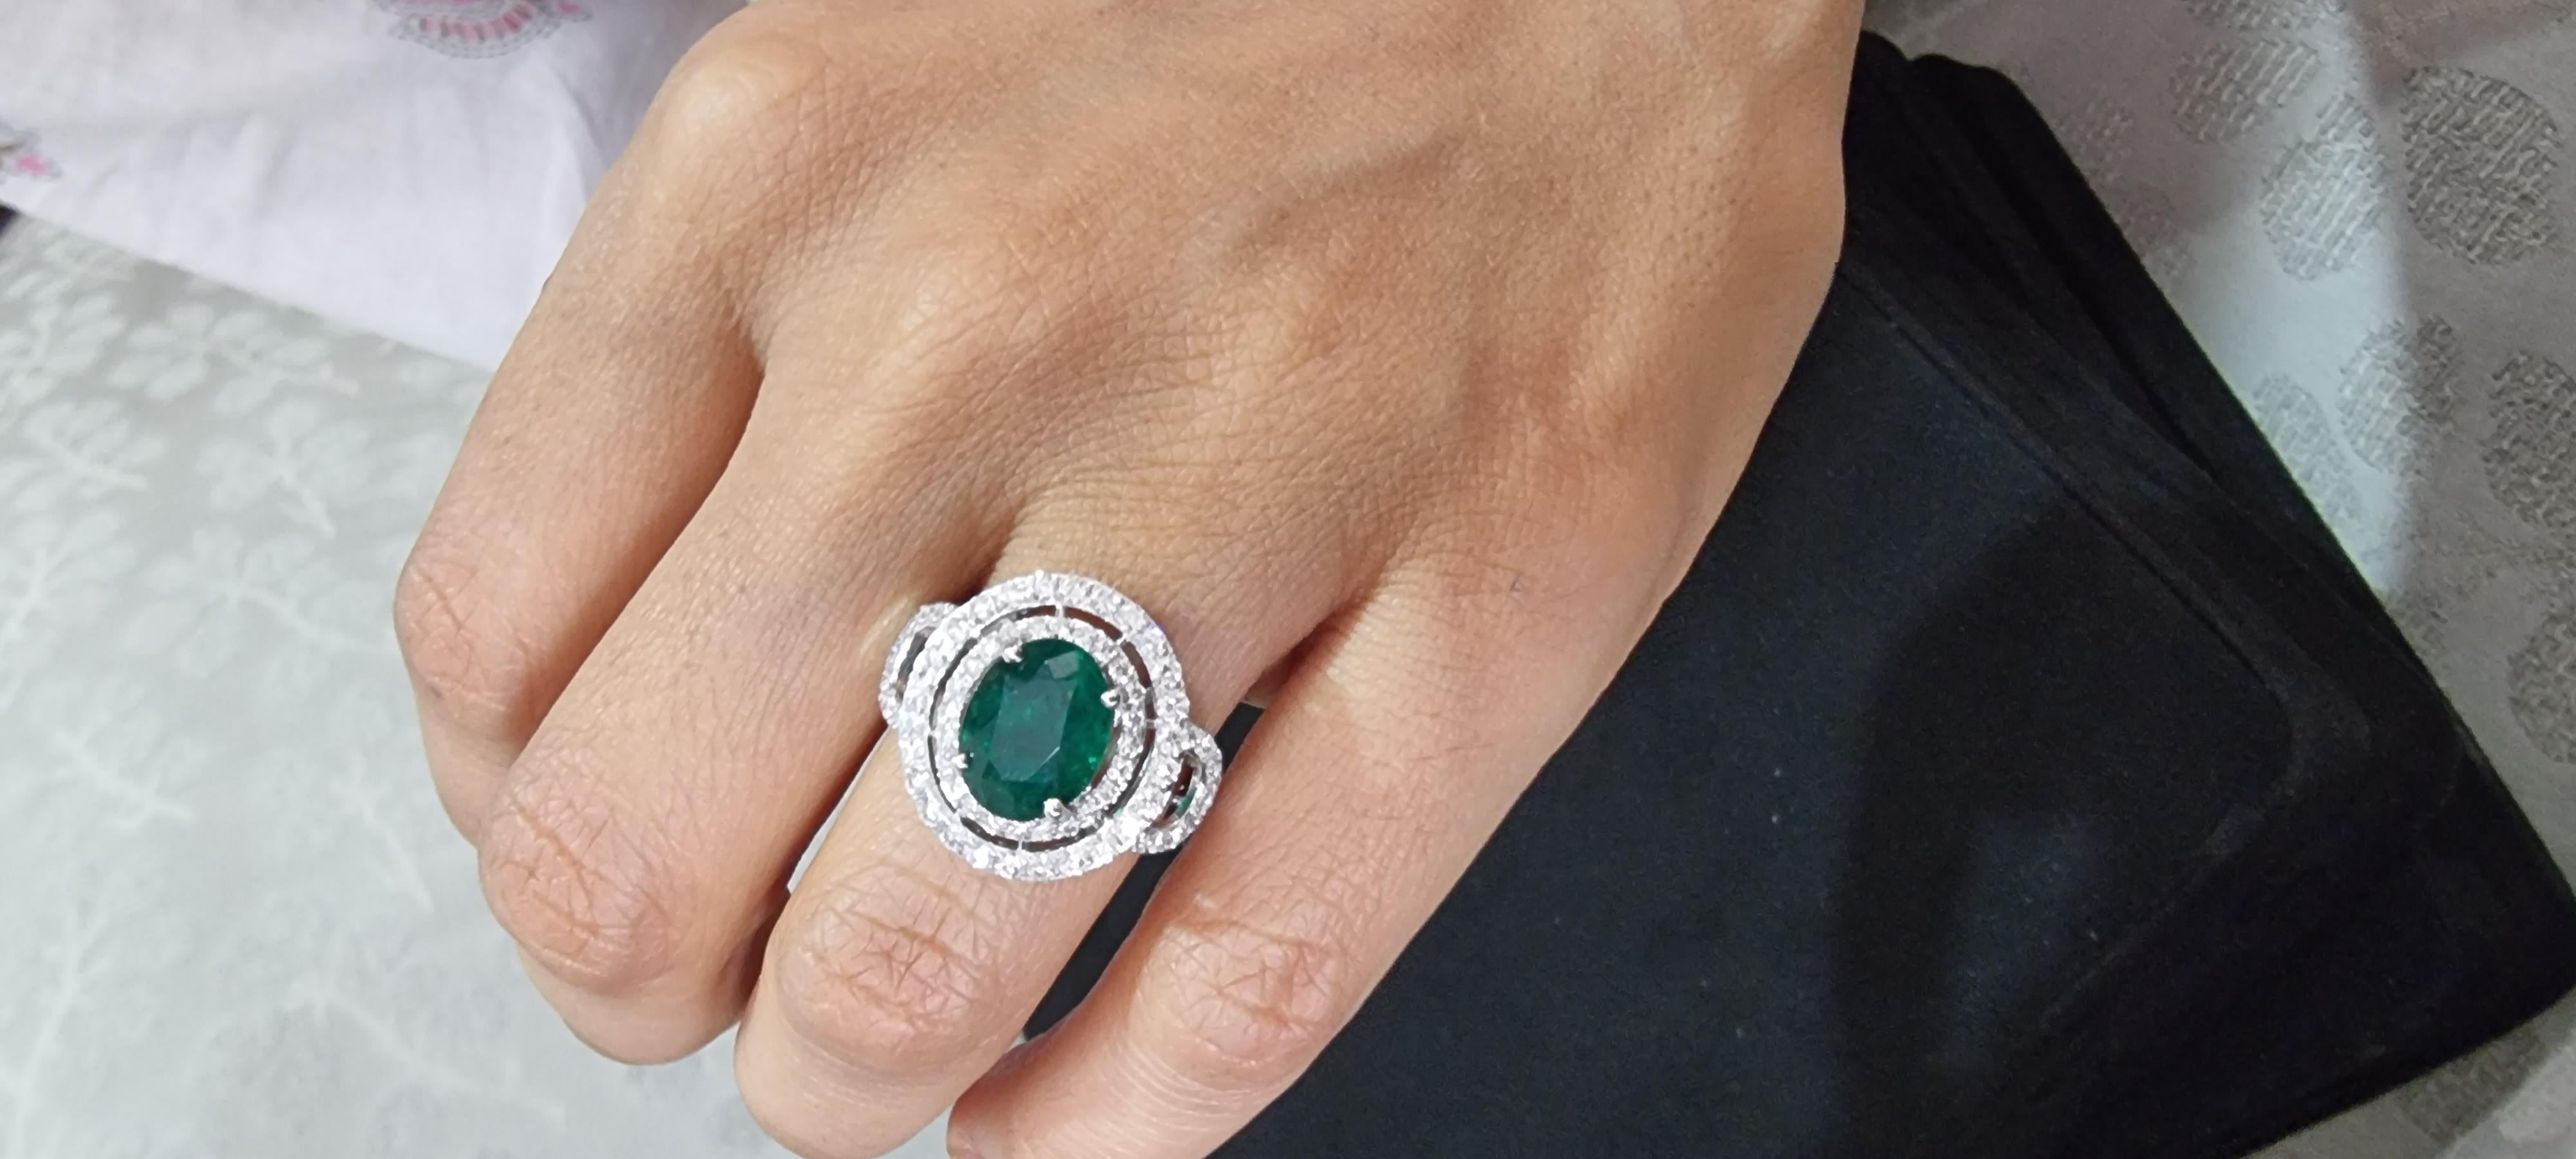 Women's 3.36 Carats Natural Zambian Emerald Ring with 1.01 Carats Diamonds and 14k Gold For Sale